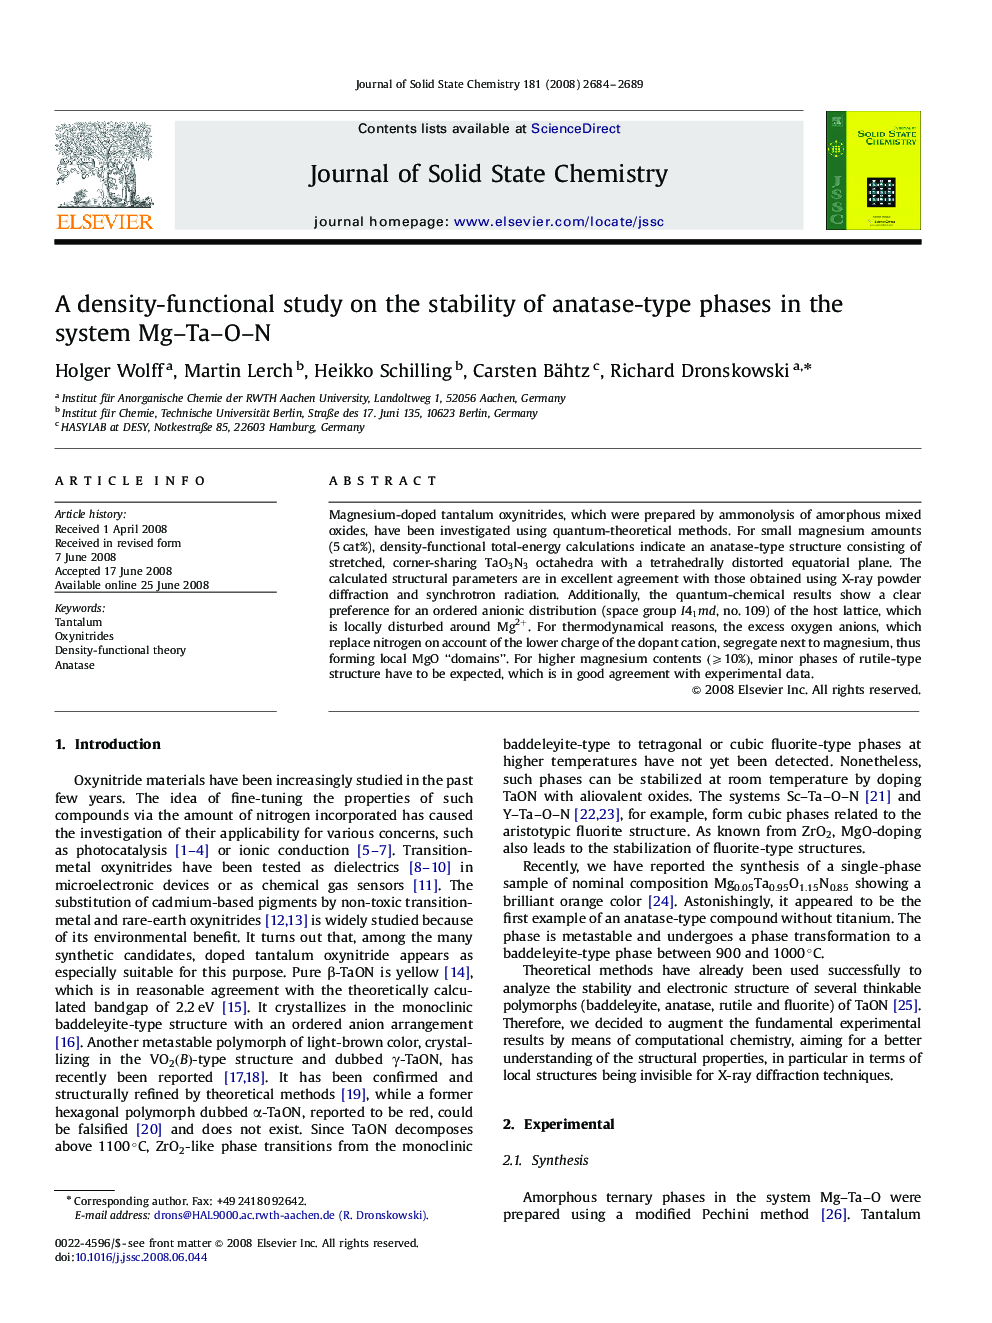 A density-functional study on the stability of anatase-type phases in the system Mg–Ta–O–N